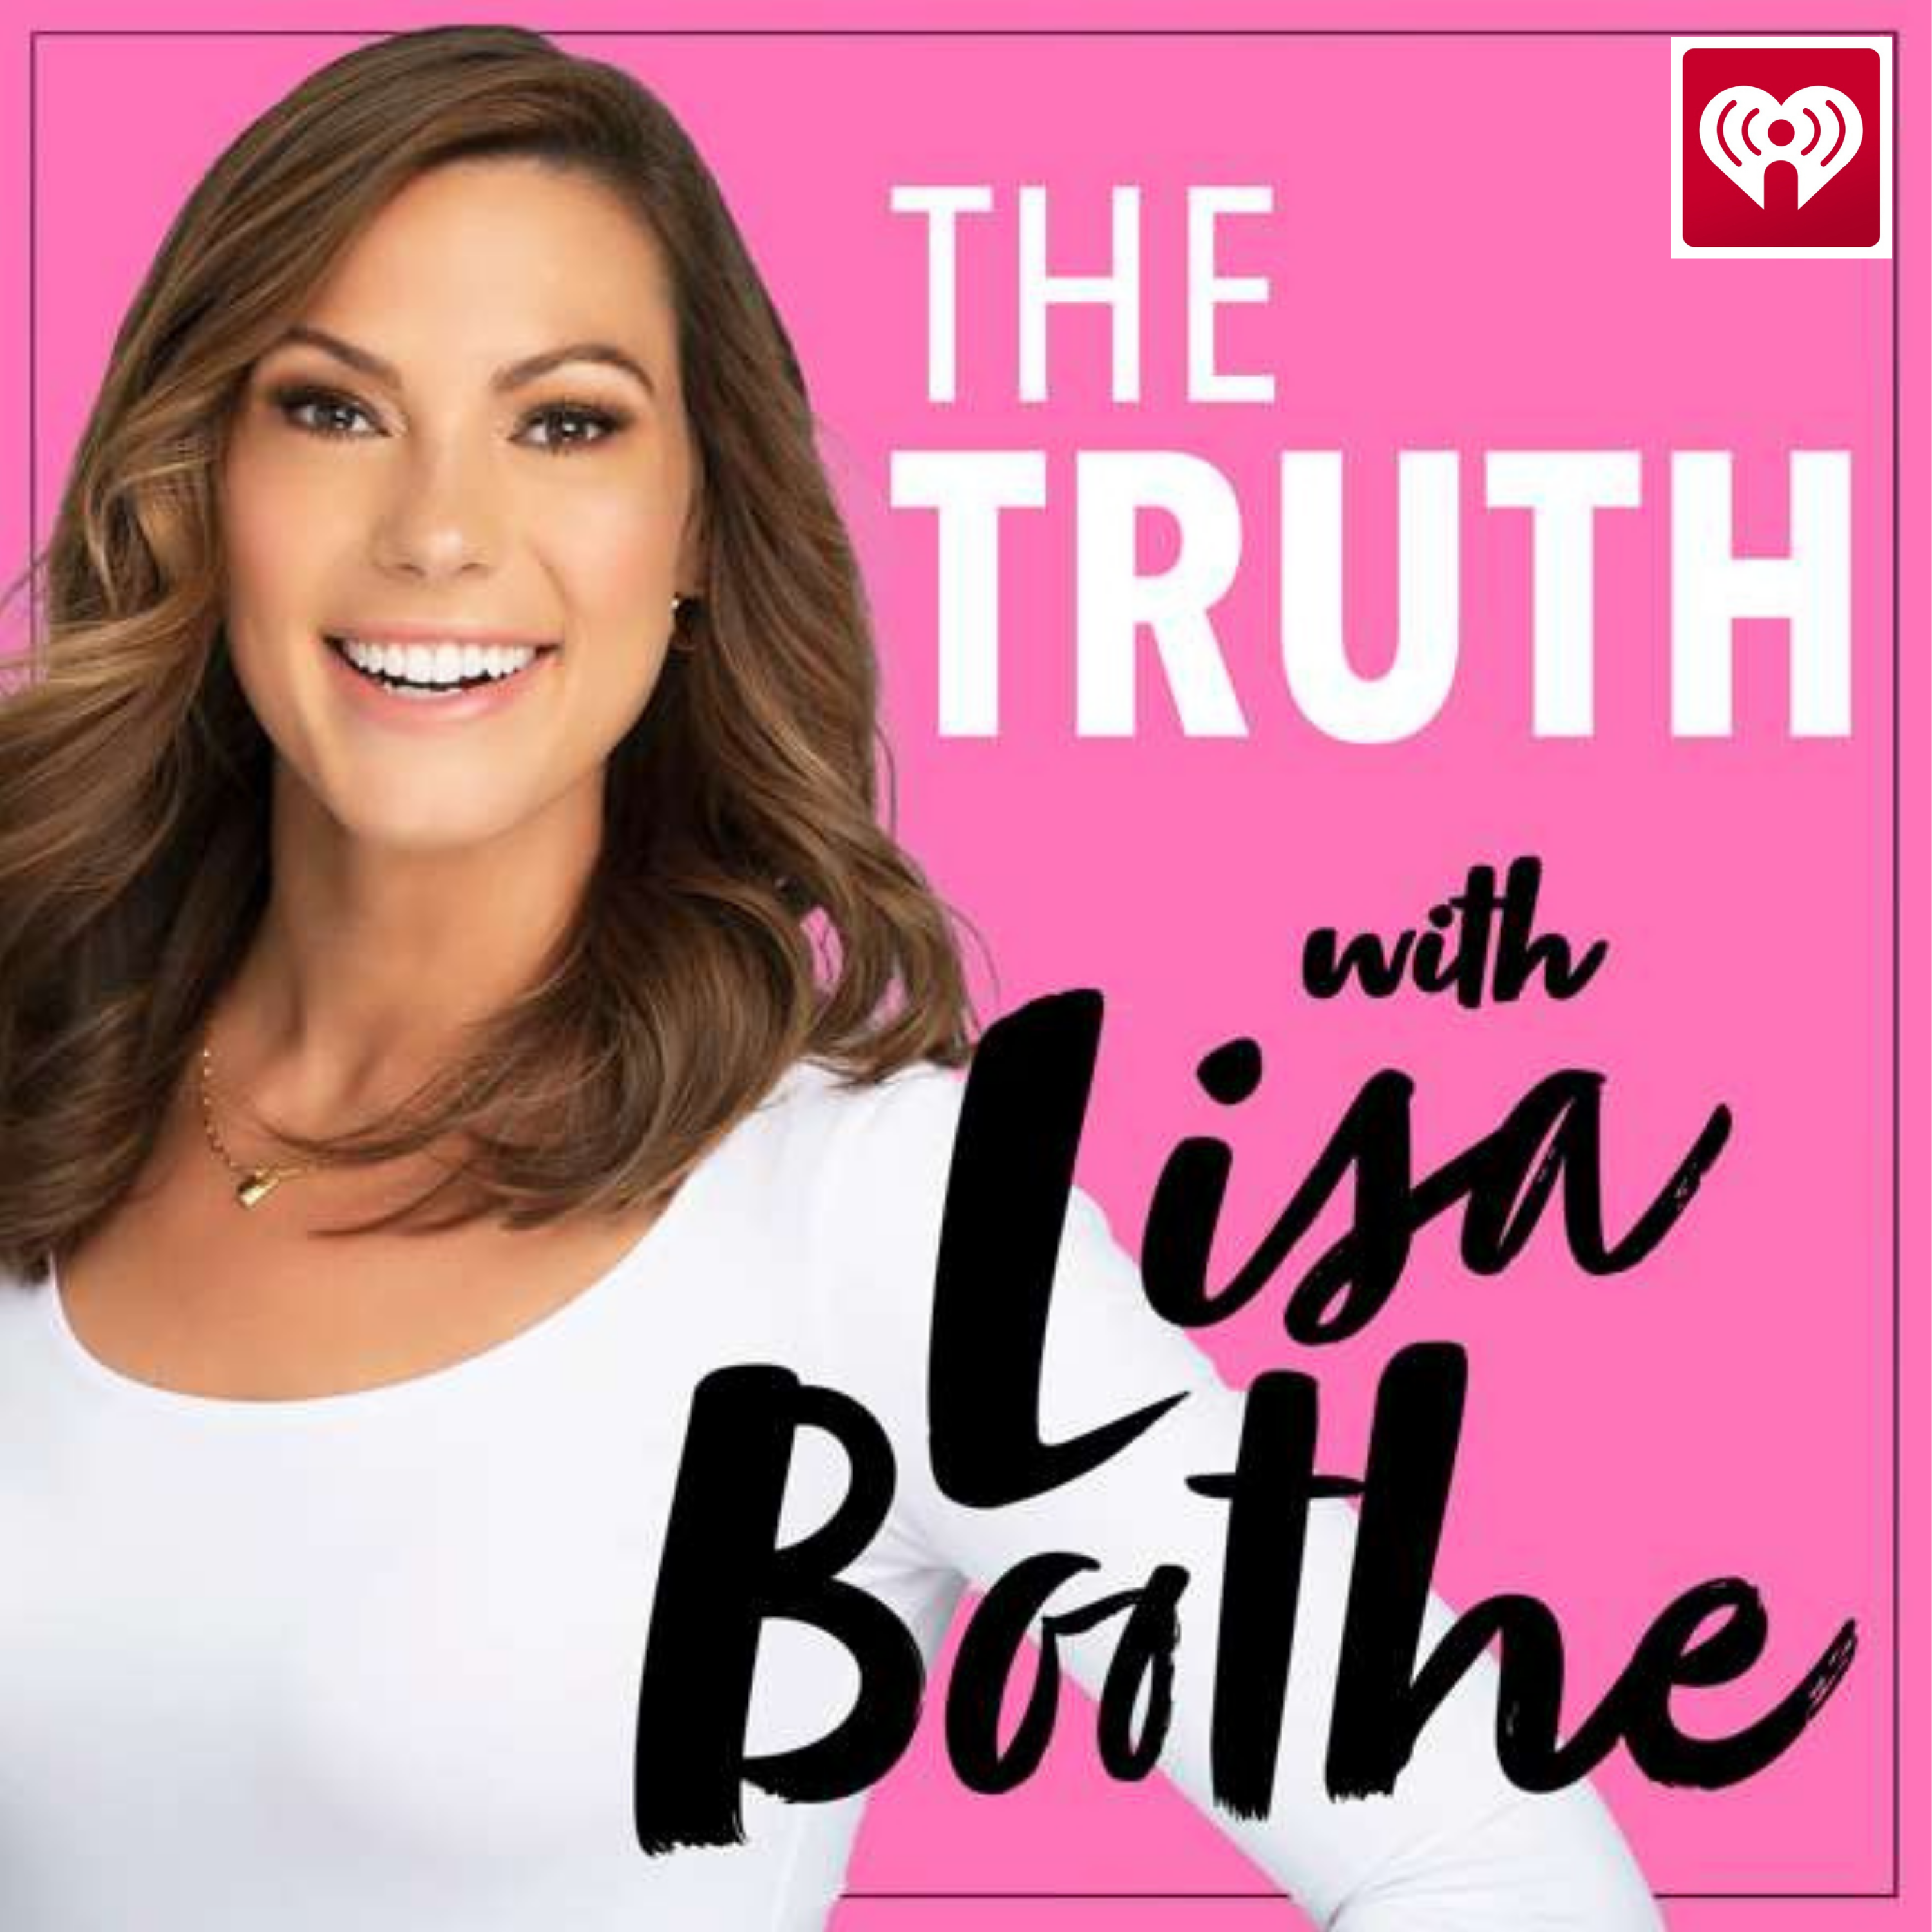 The Truth with Lisa Boothe: The Taylor Swift Effect with Outkick's Bobby Burack